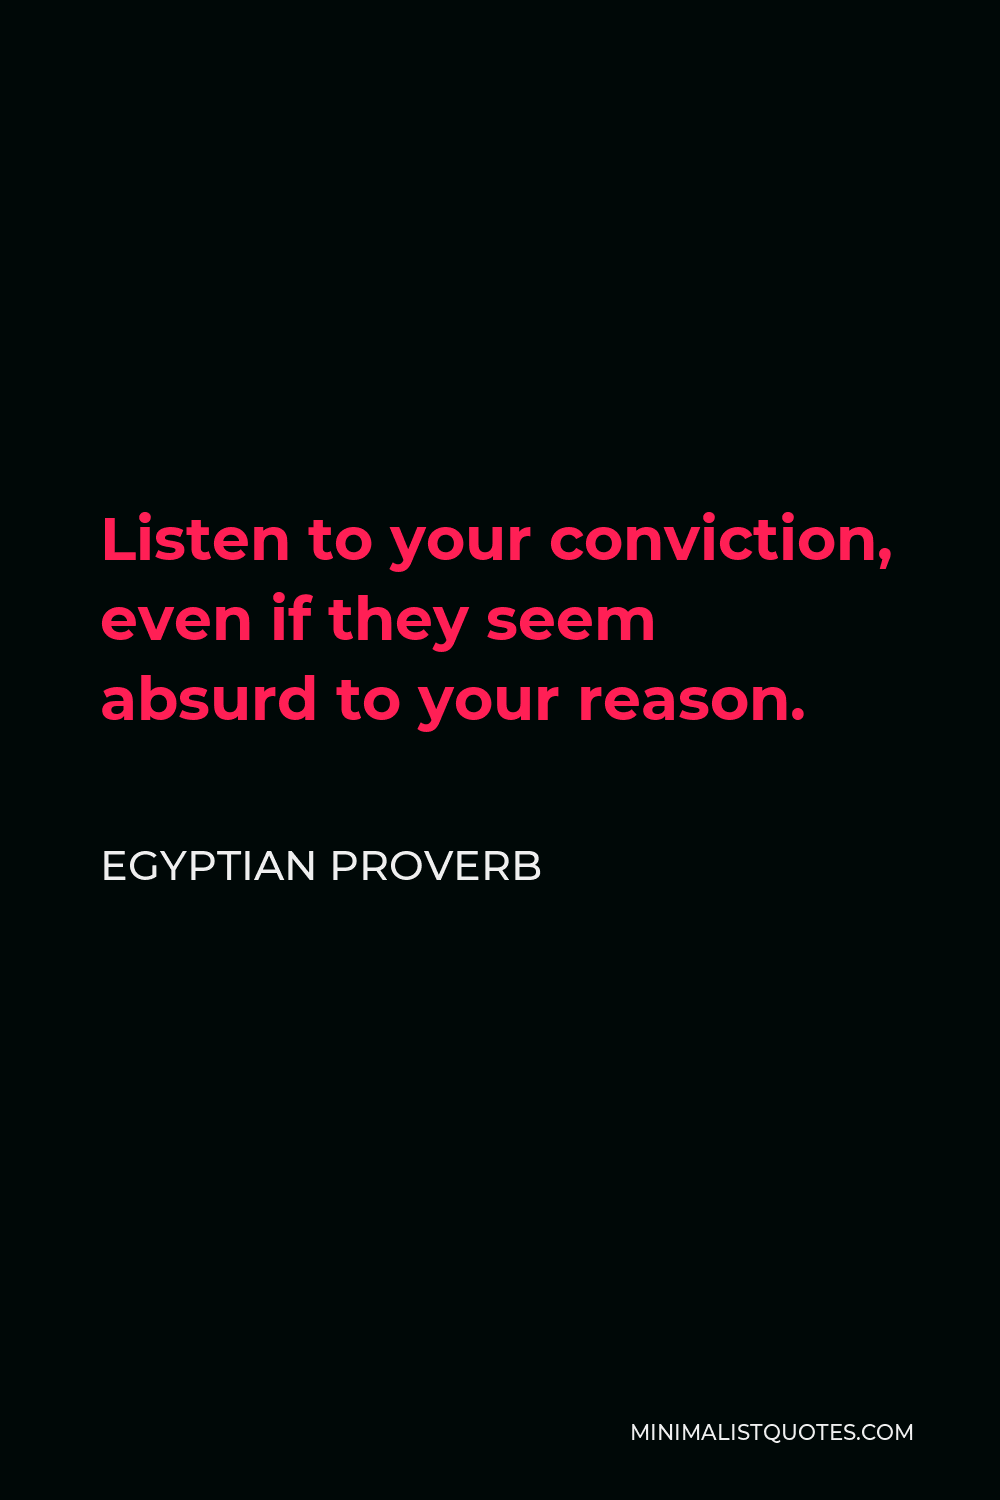 Egyptian Proverb Quote - Listen to your conviction, even if they seem absurd to your reason.